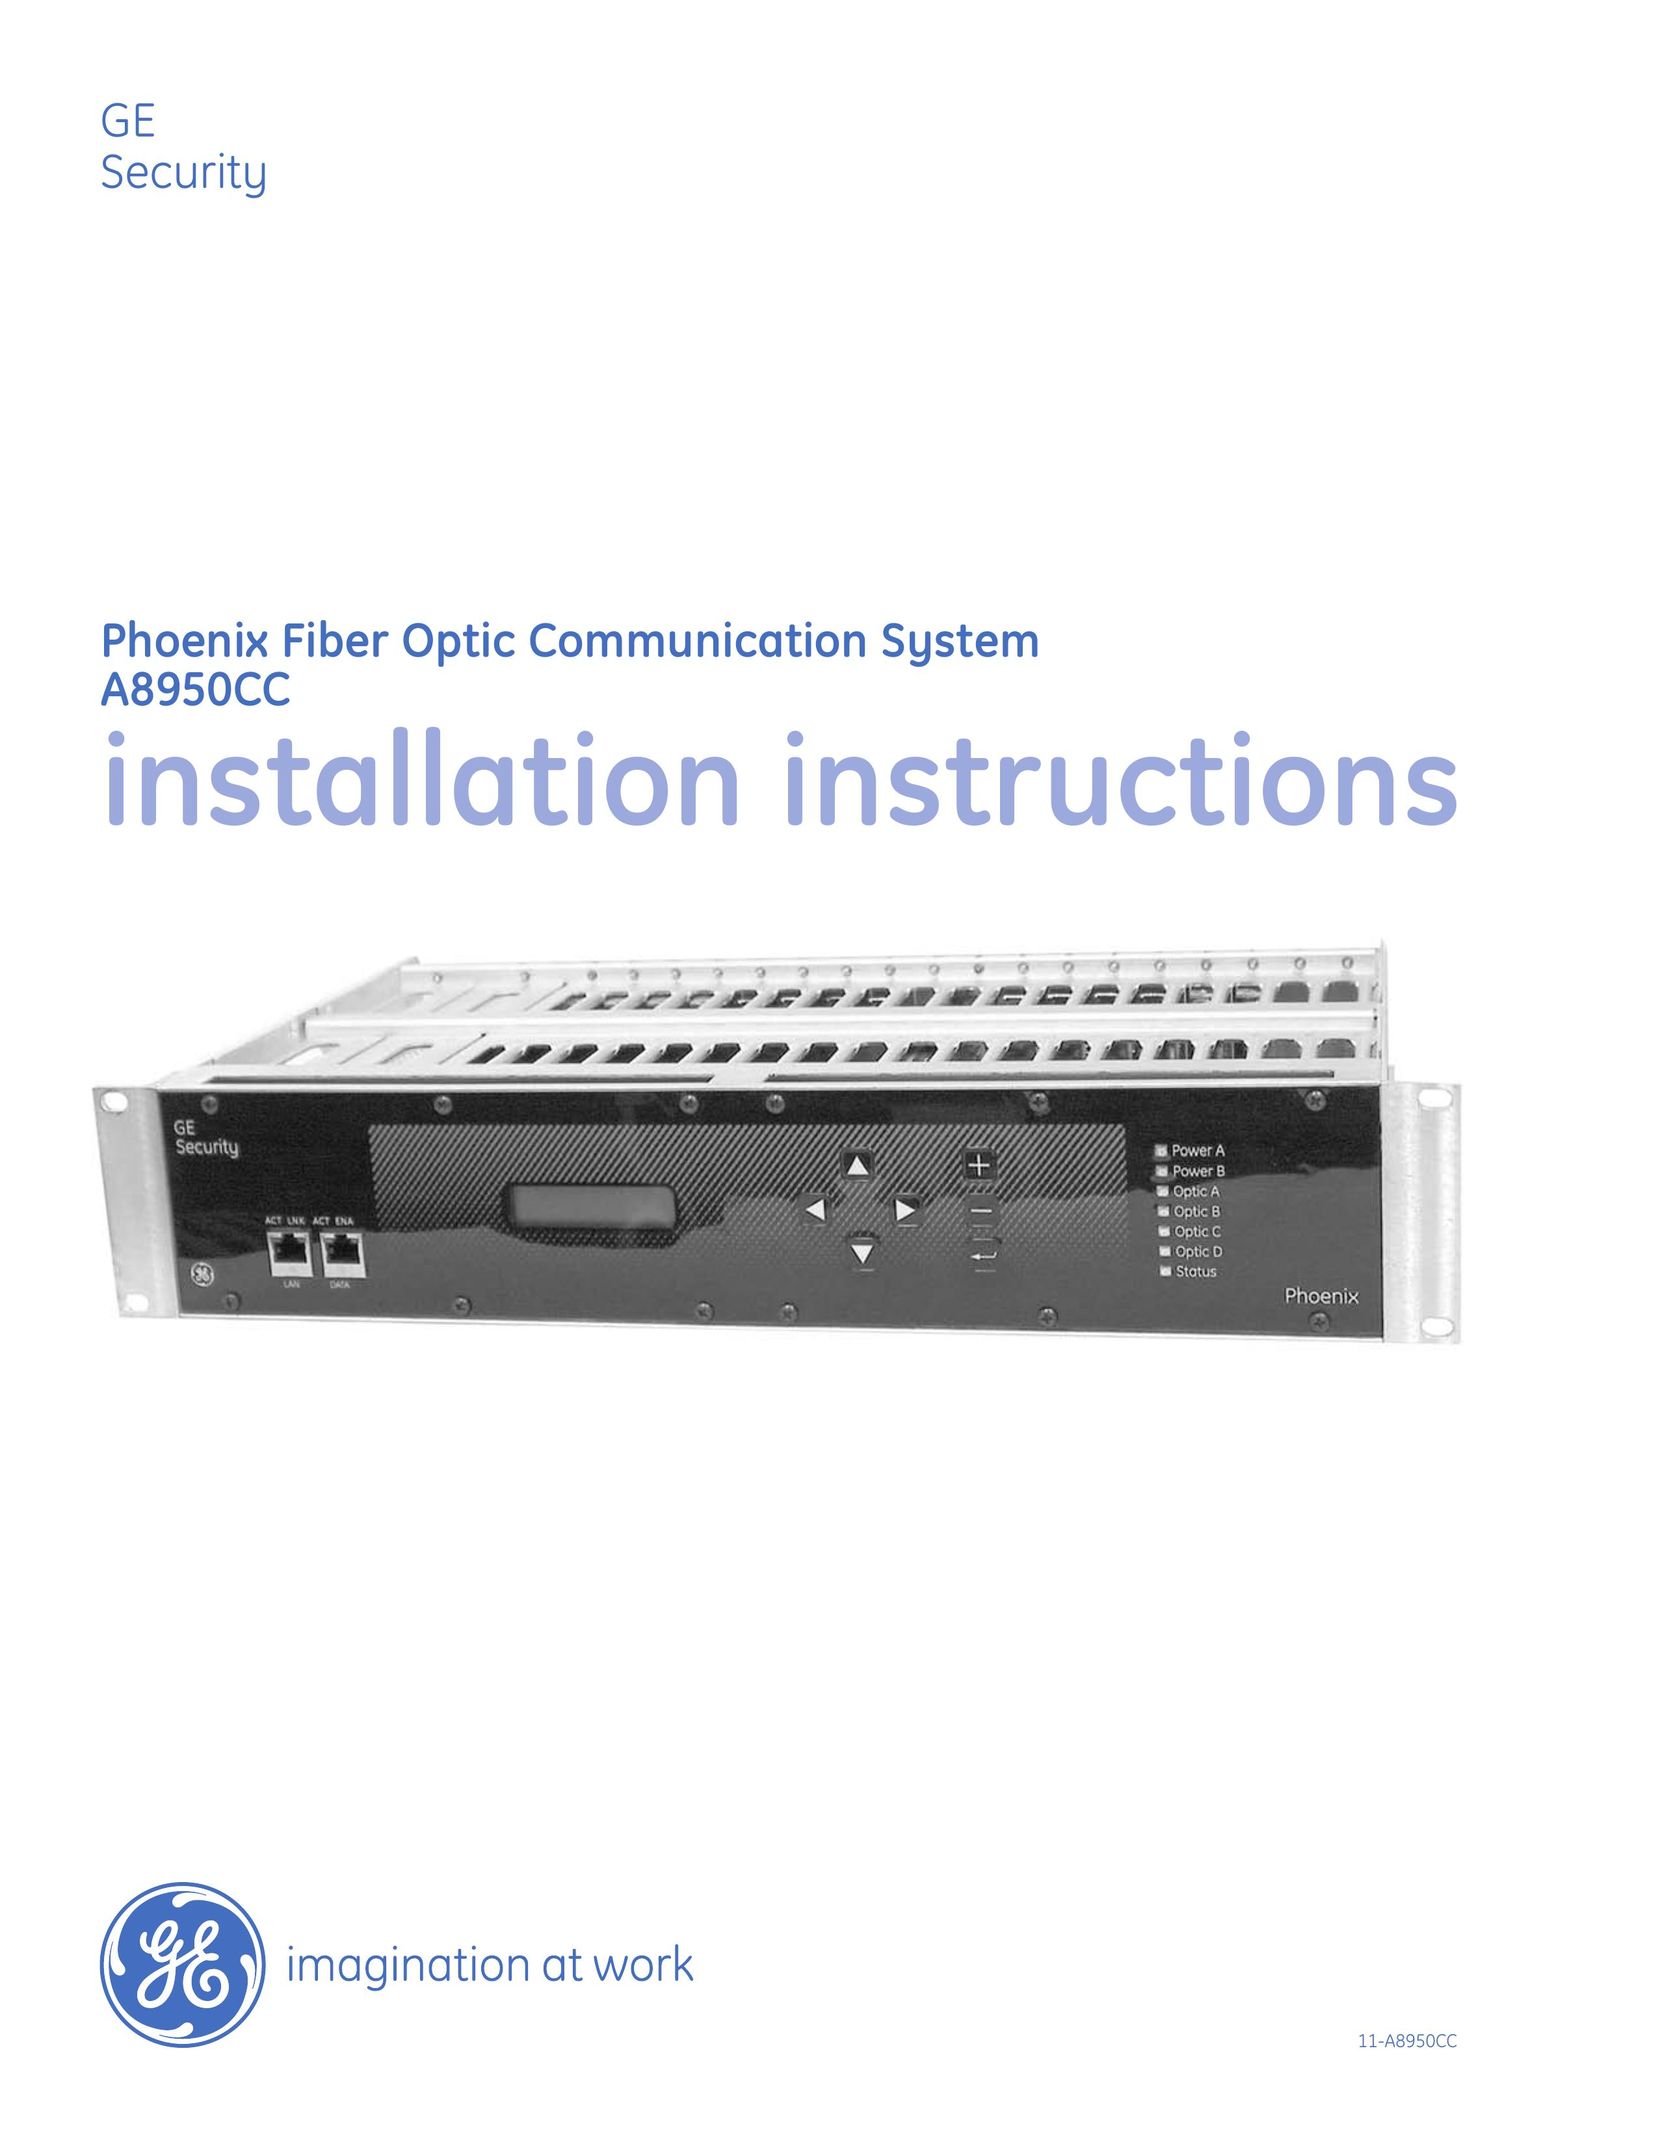 GE A8950CC Network Router User Manual